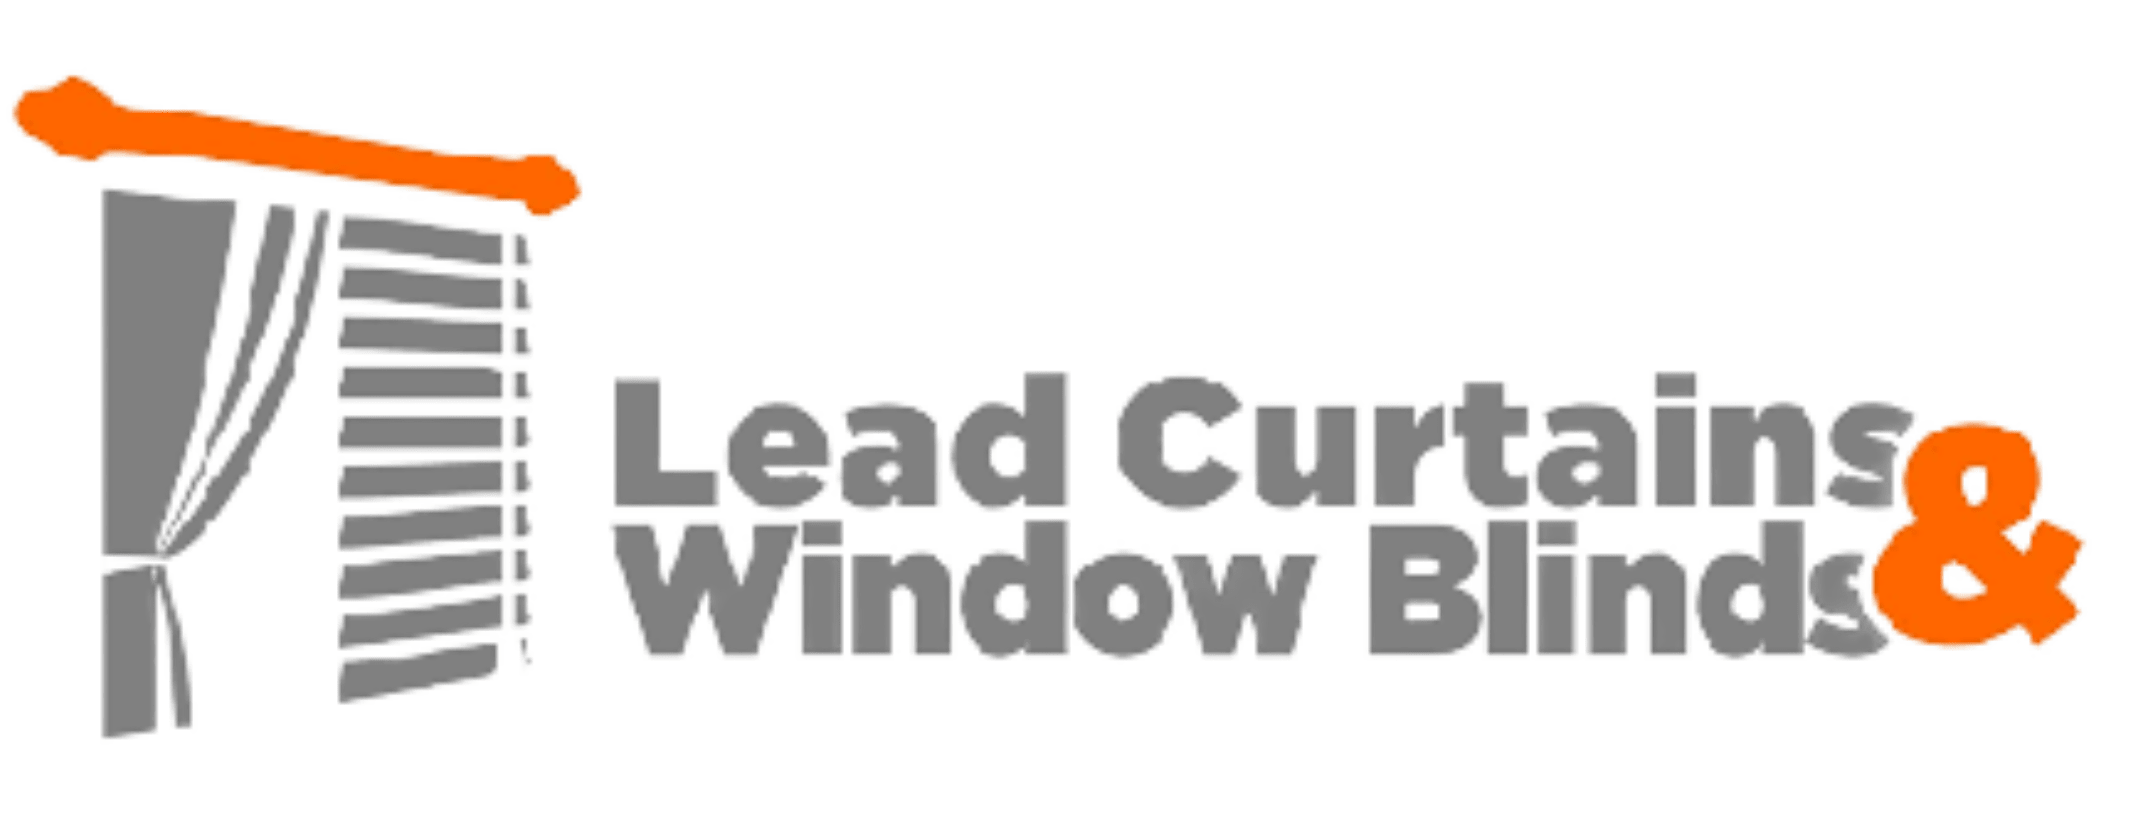 Lead Curtains and Window Blinds